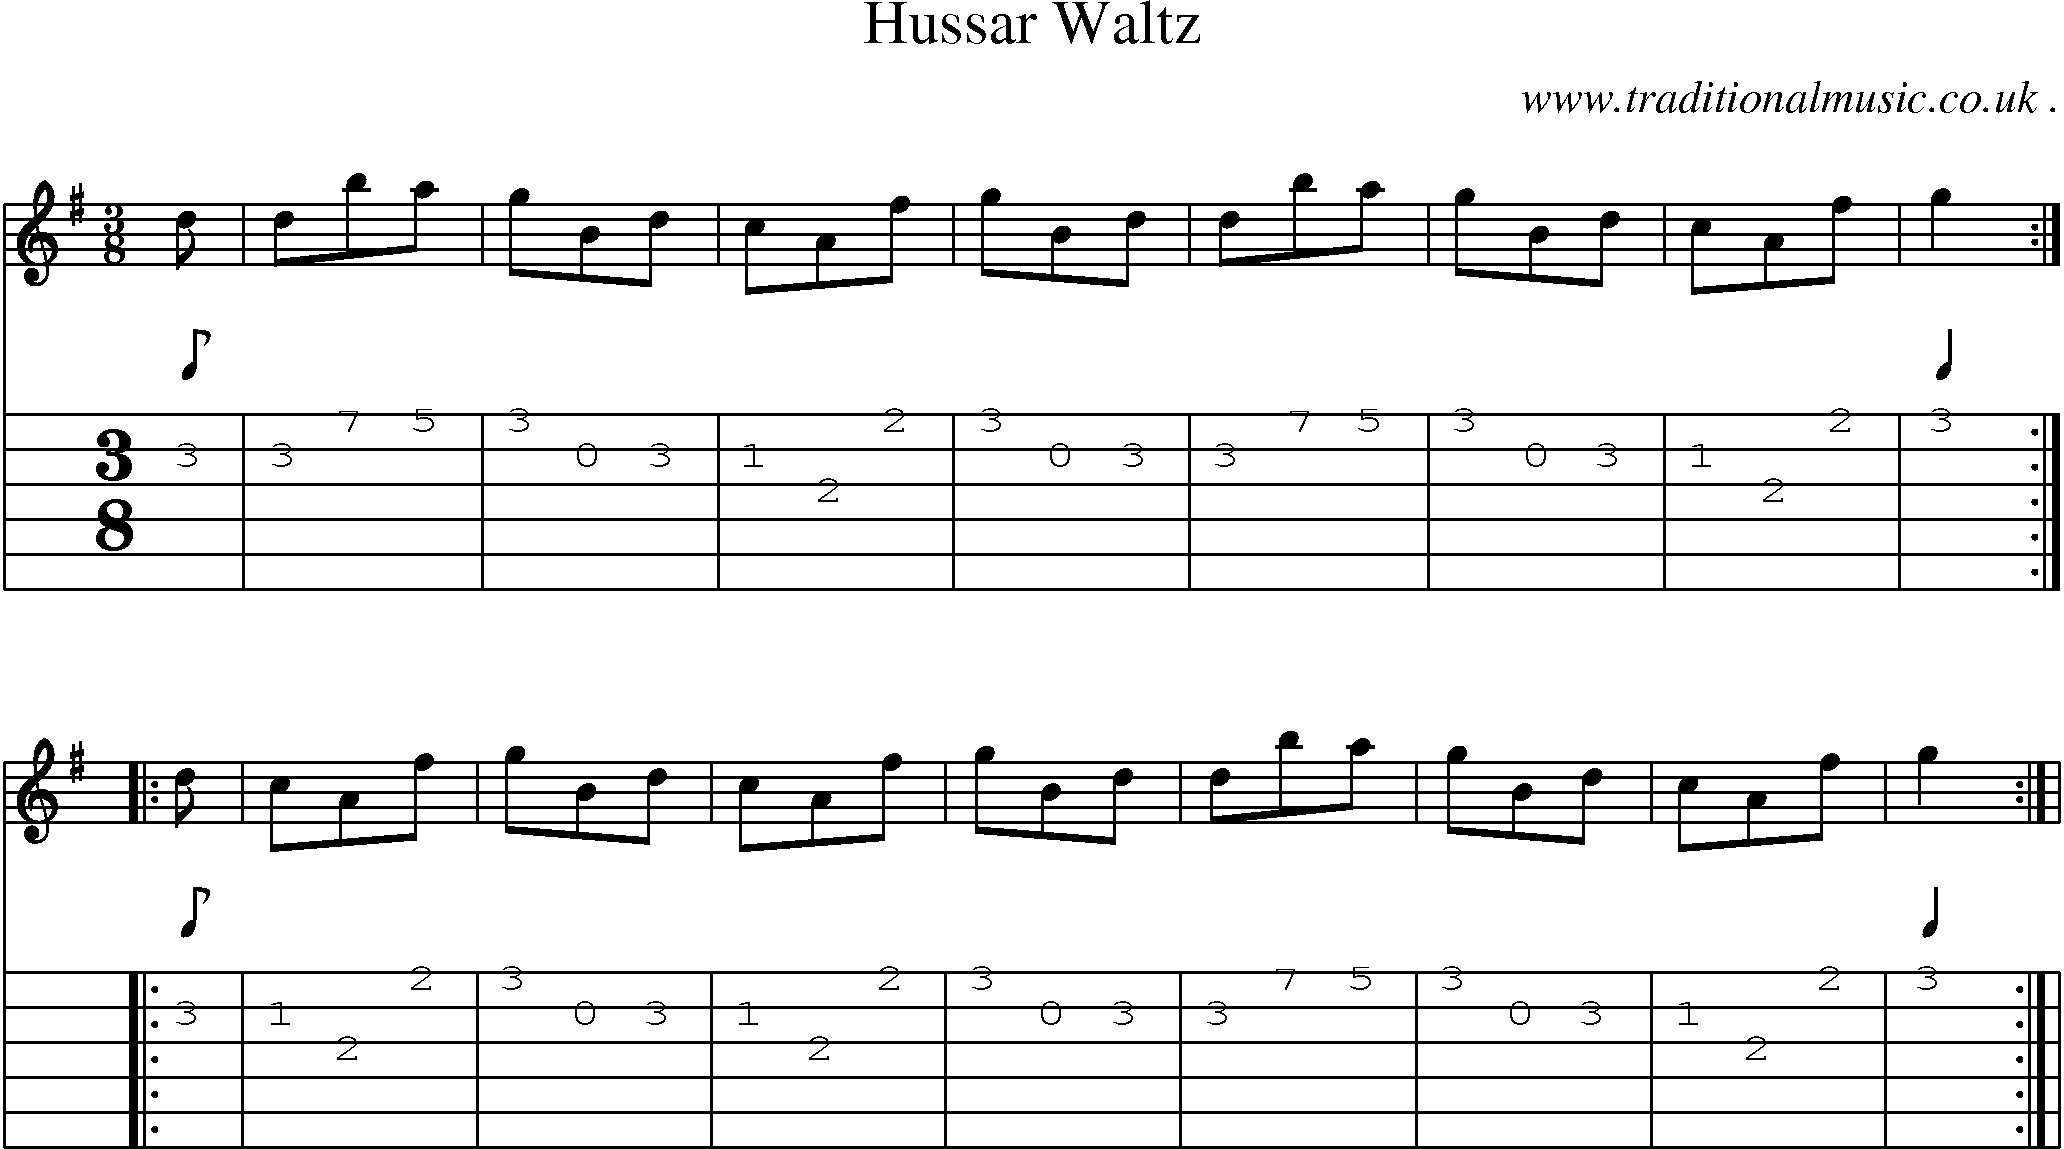 Sheet-Music and Guitar Tabs for Hussar Waltz